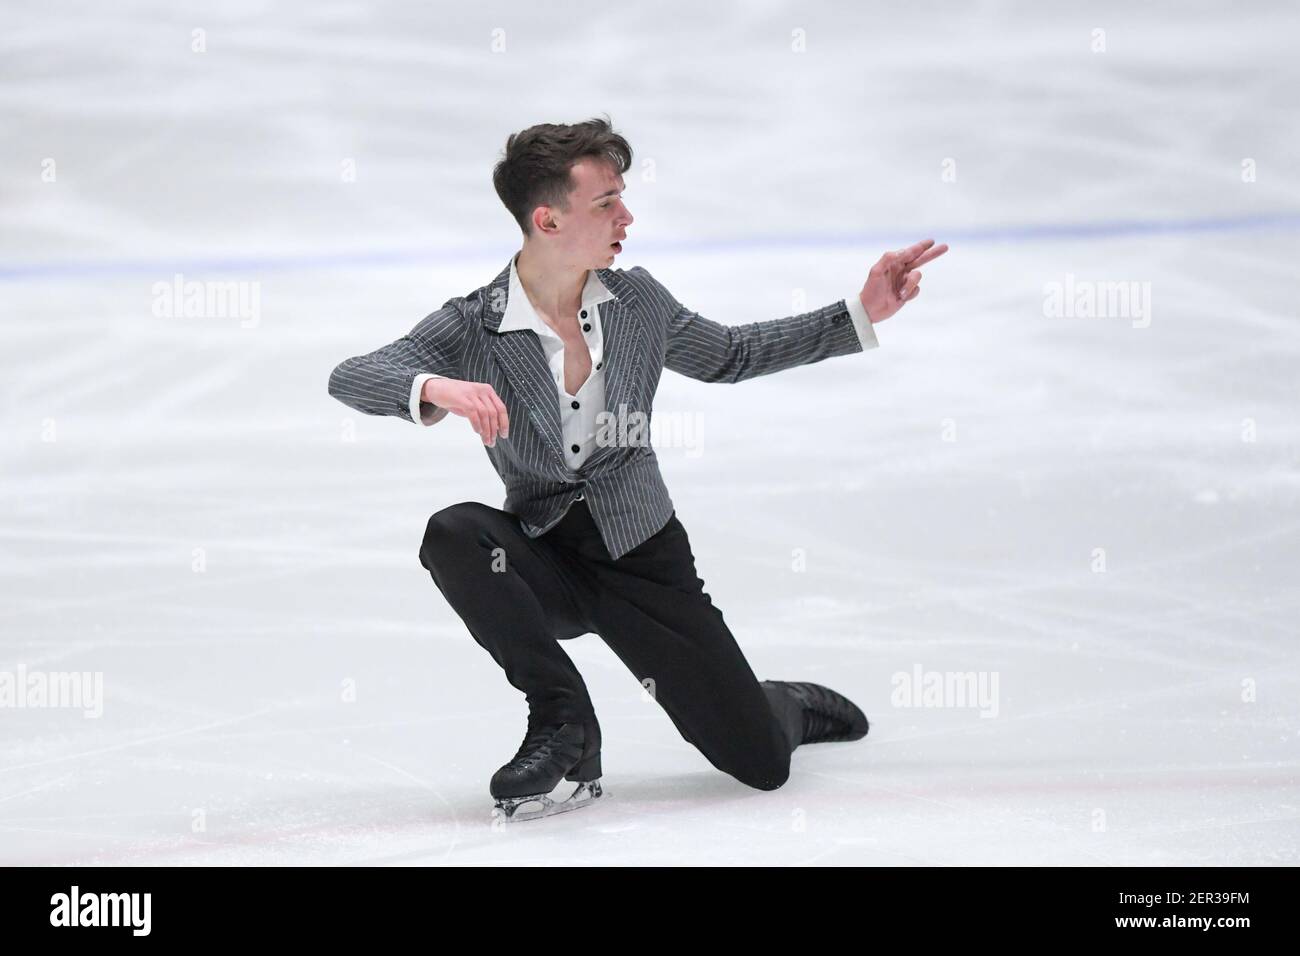 THE HAGUE, NETHERLANDS - FEBRUARY 28: Kornel Witkowski of Poland competes in the figure skating men's free skate program on Day 4 during the Challenge Stock Photo